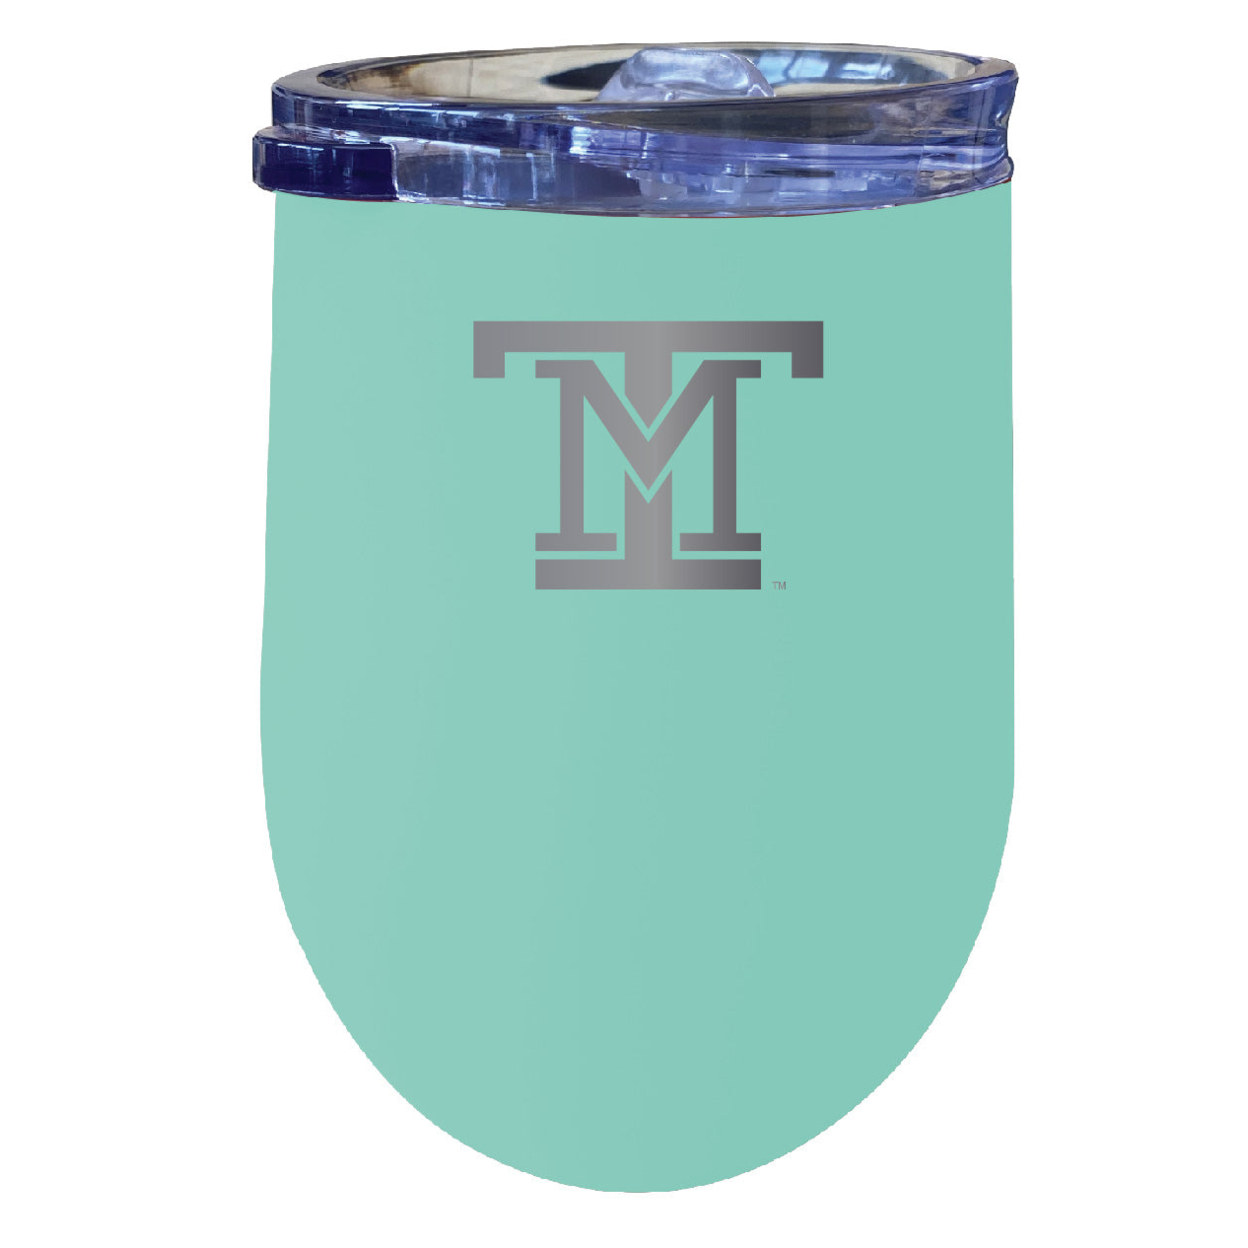 Montana Tech 12 Oz Etched Insulated Wine Stainless Steel Tumbler - Choose Your Color - Seafoam